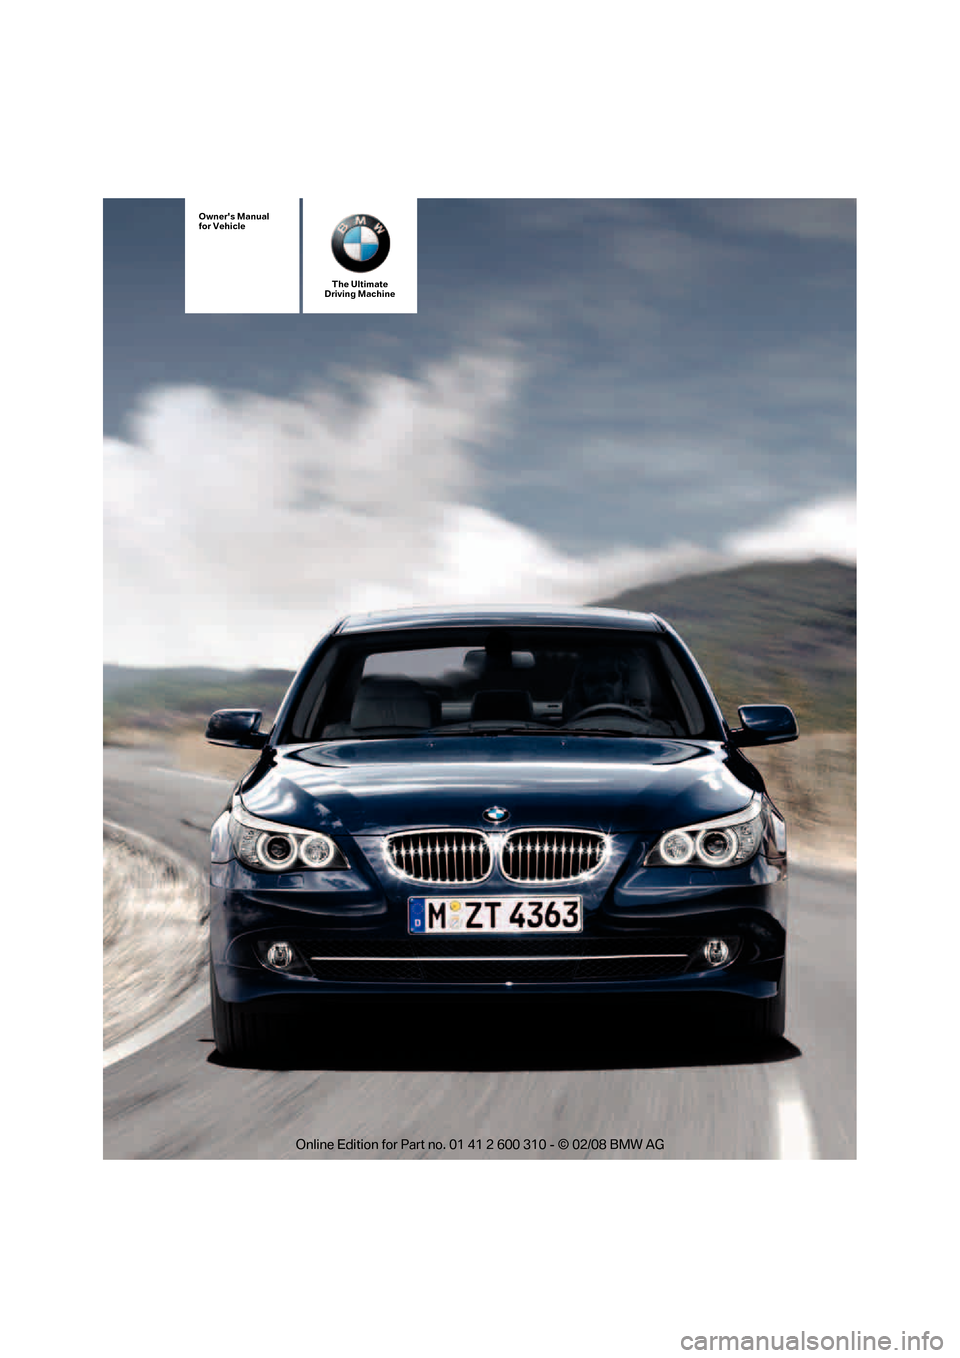 BMW 550I TOURING 2008 E61 Owners Manual The Ultimate
Driving Machine
Owners Manual
for Vehicle 